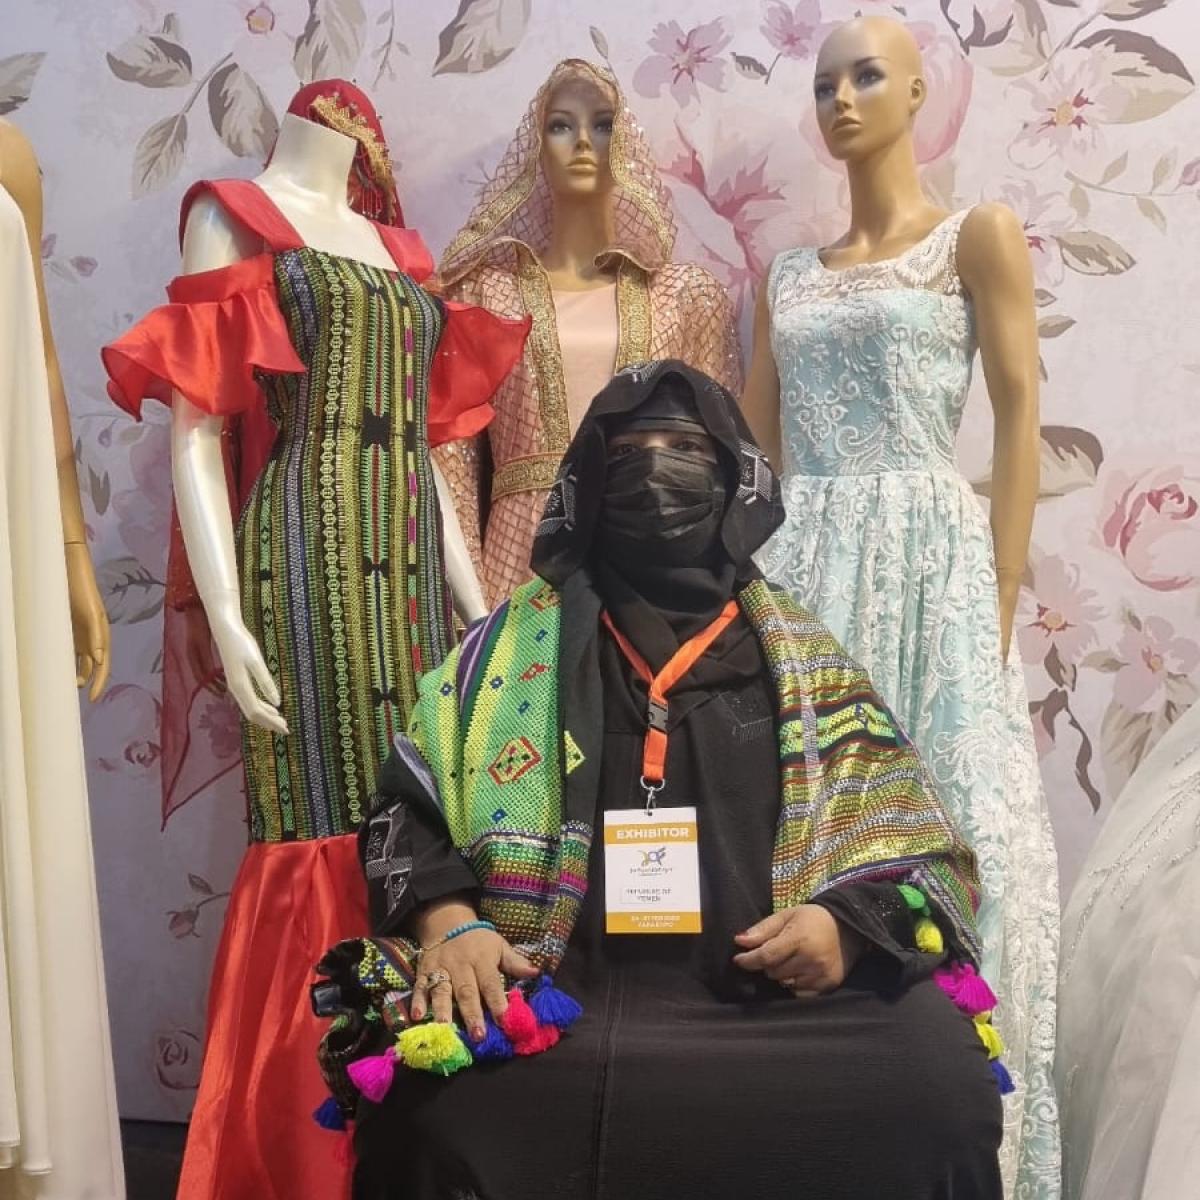 Fayza Salim Nany with some of her clothing products at the JO Fashion Expo in Amman, Jordan.